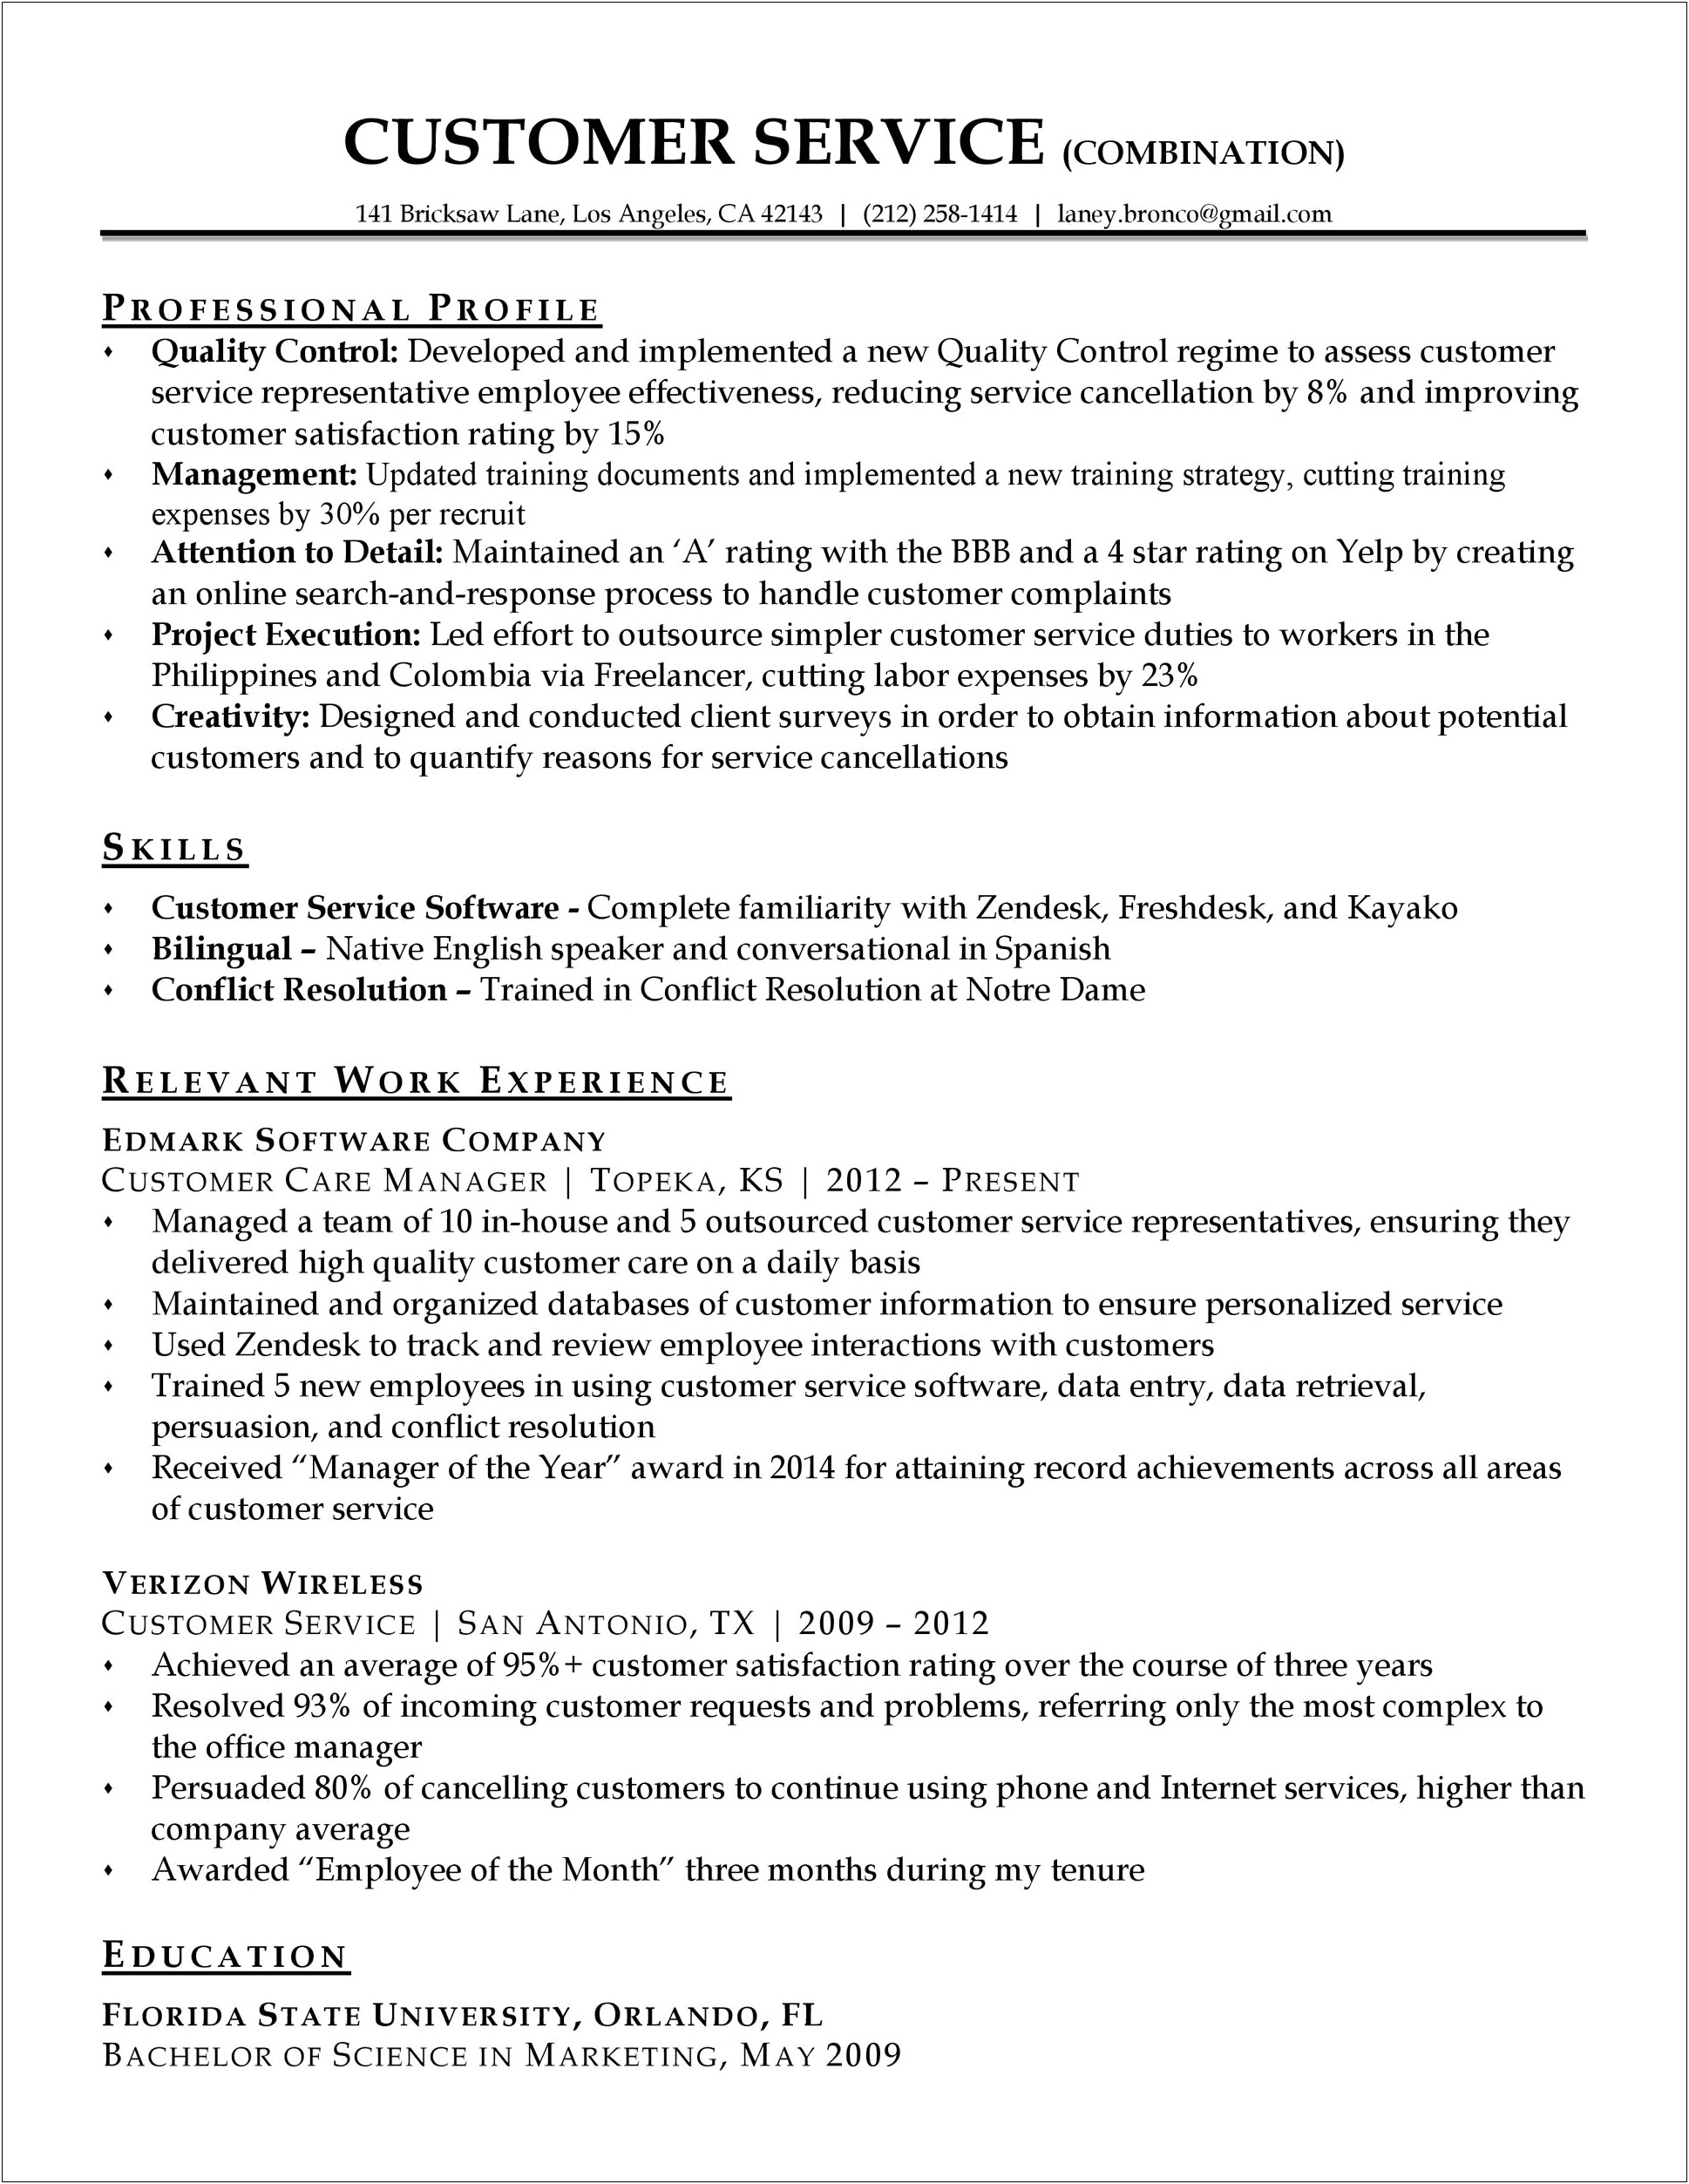 Free Examples Of Combination Resumes